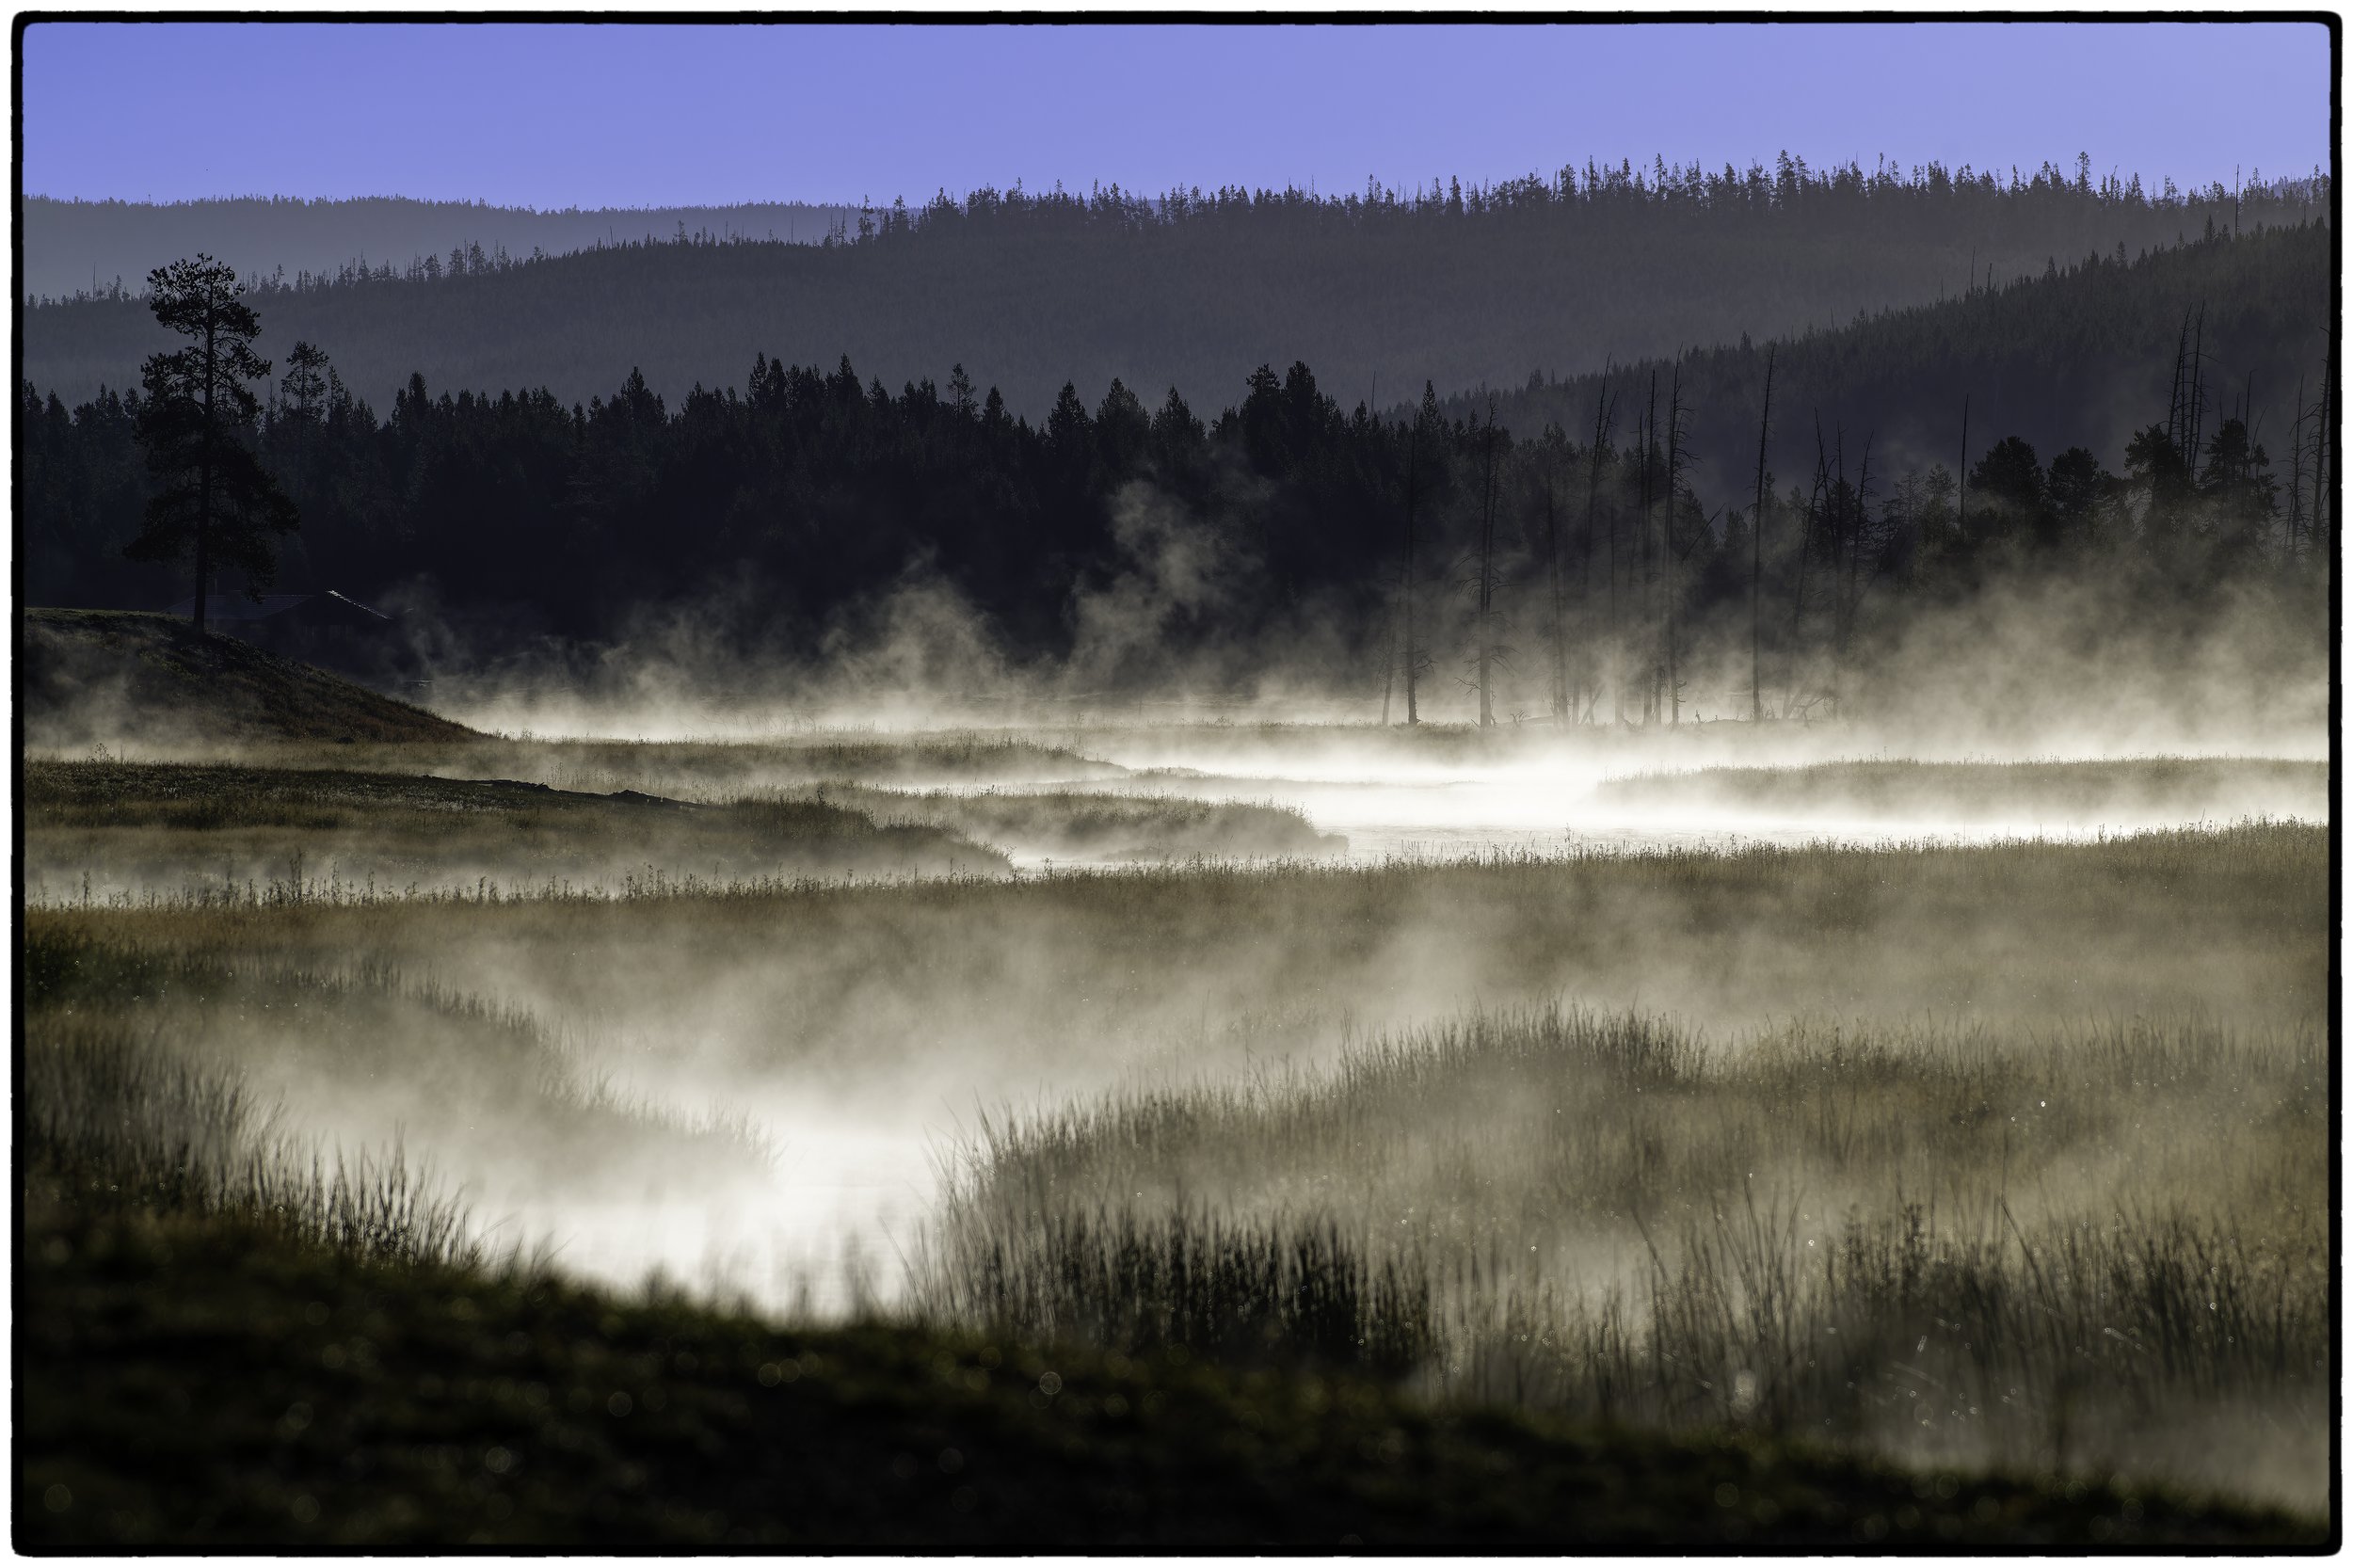 Early Morning, five miles into Yellowstone